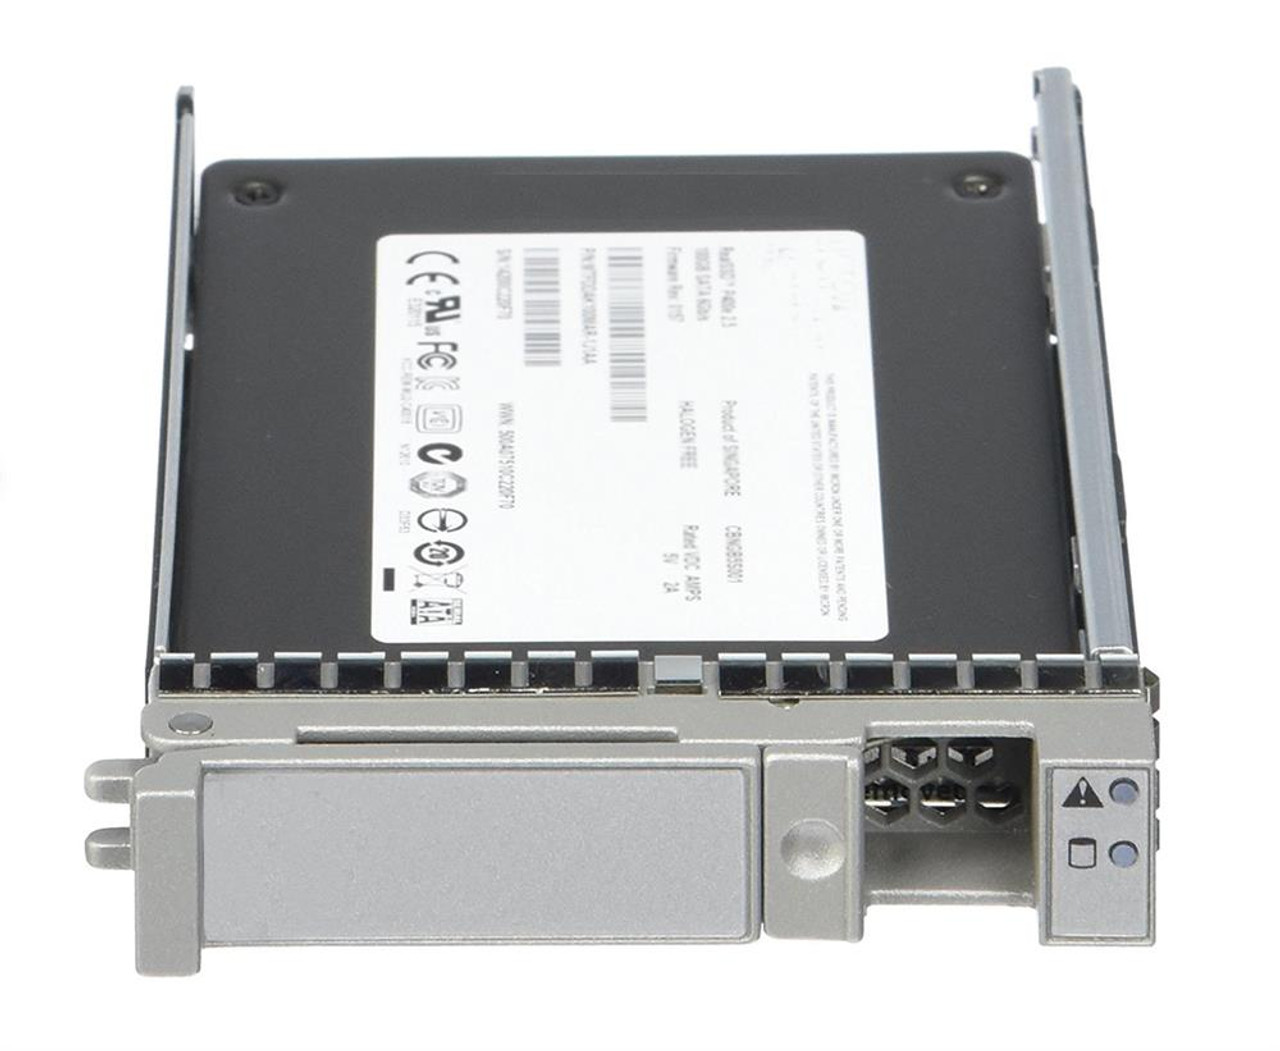 APICSD120G0KS2EVRF Cisco Enterprise Value 120GB SATA 6Gbps 2.5-inch Internal Solid State Drive (SSD) (SLED Mounted)